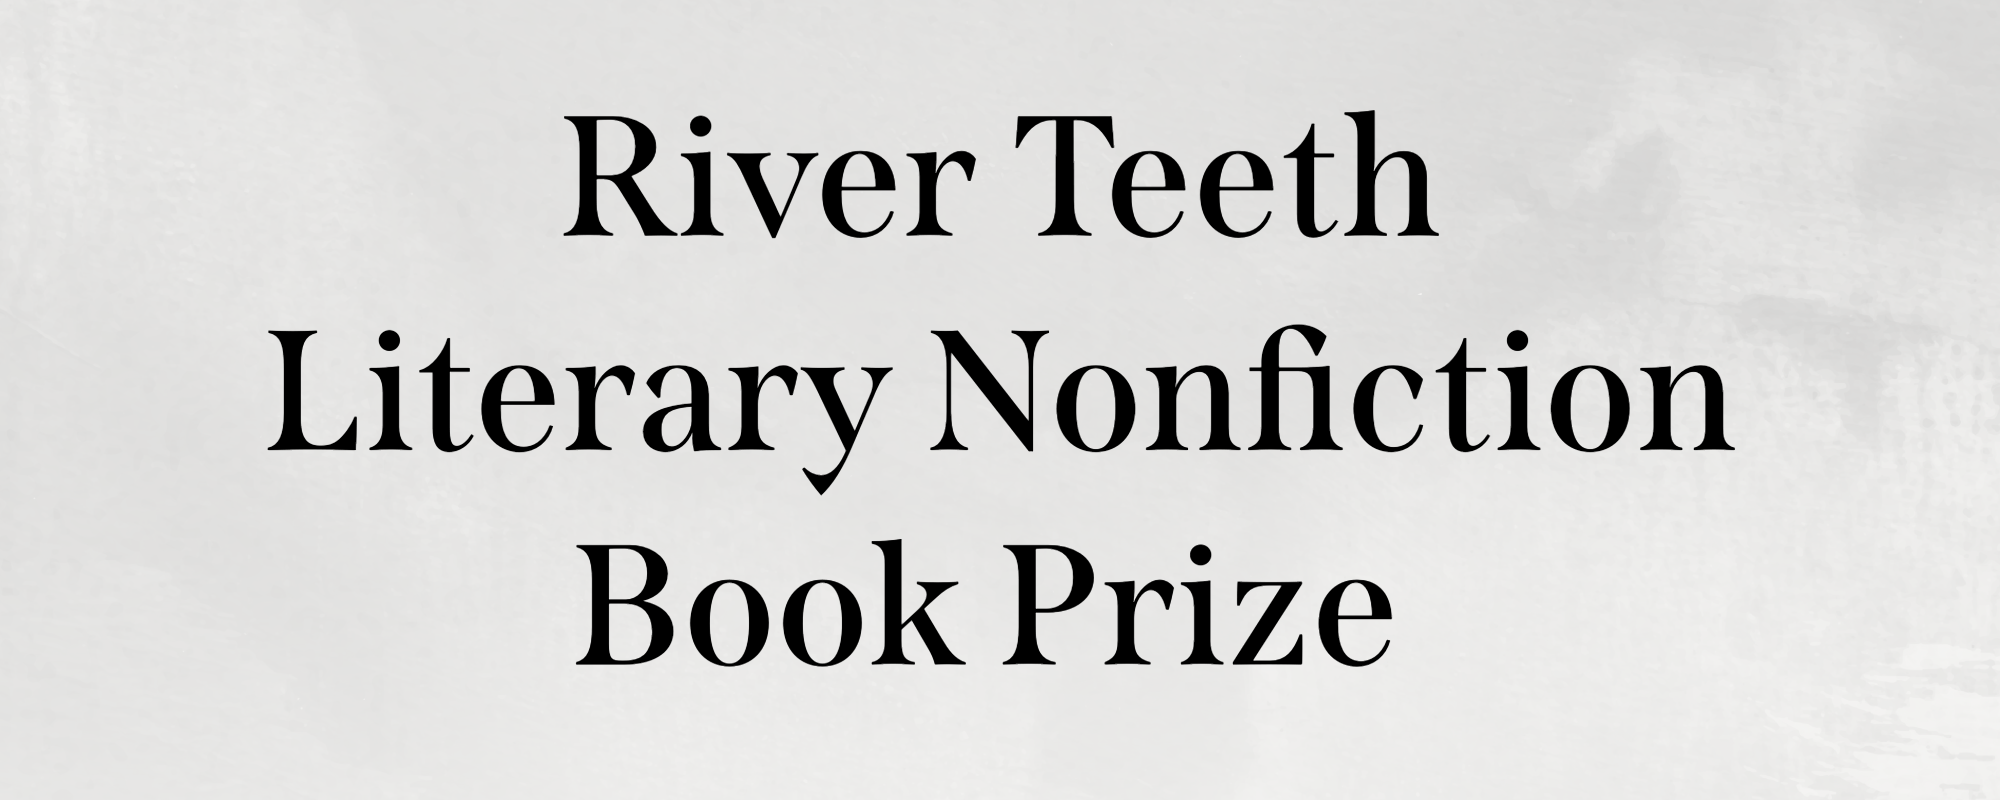 River Teeth Literary Nonfiction Book Prize